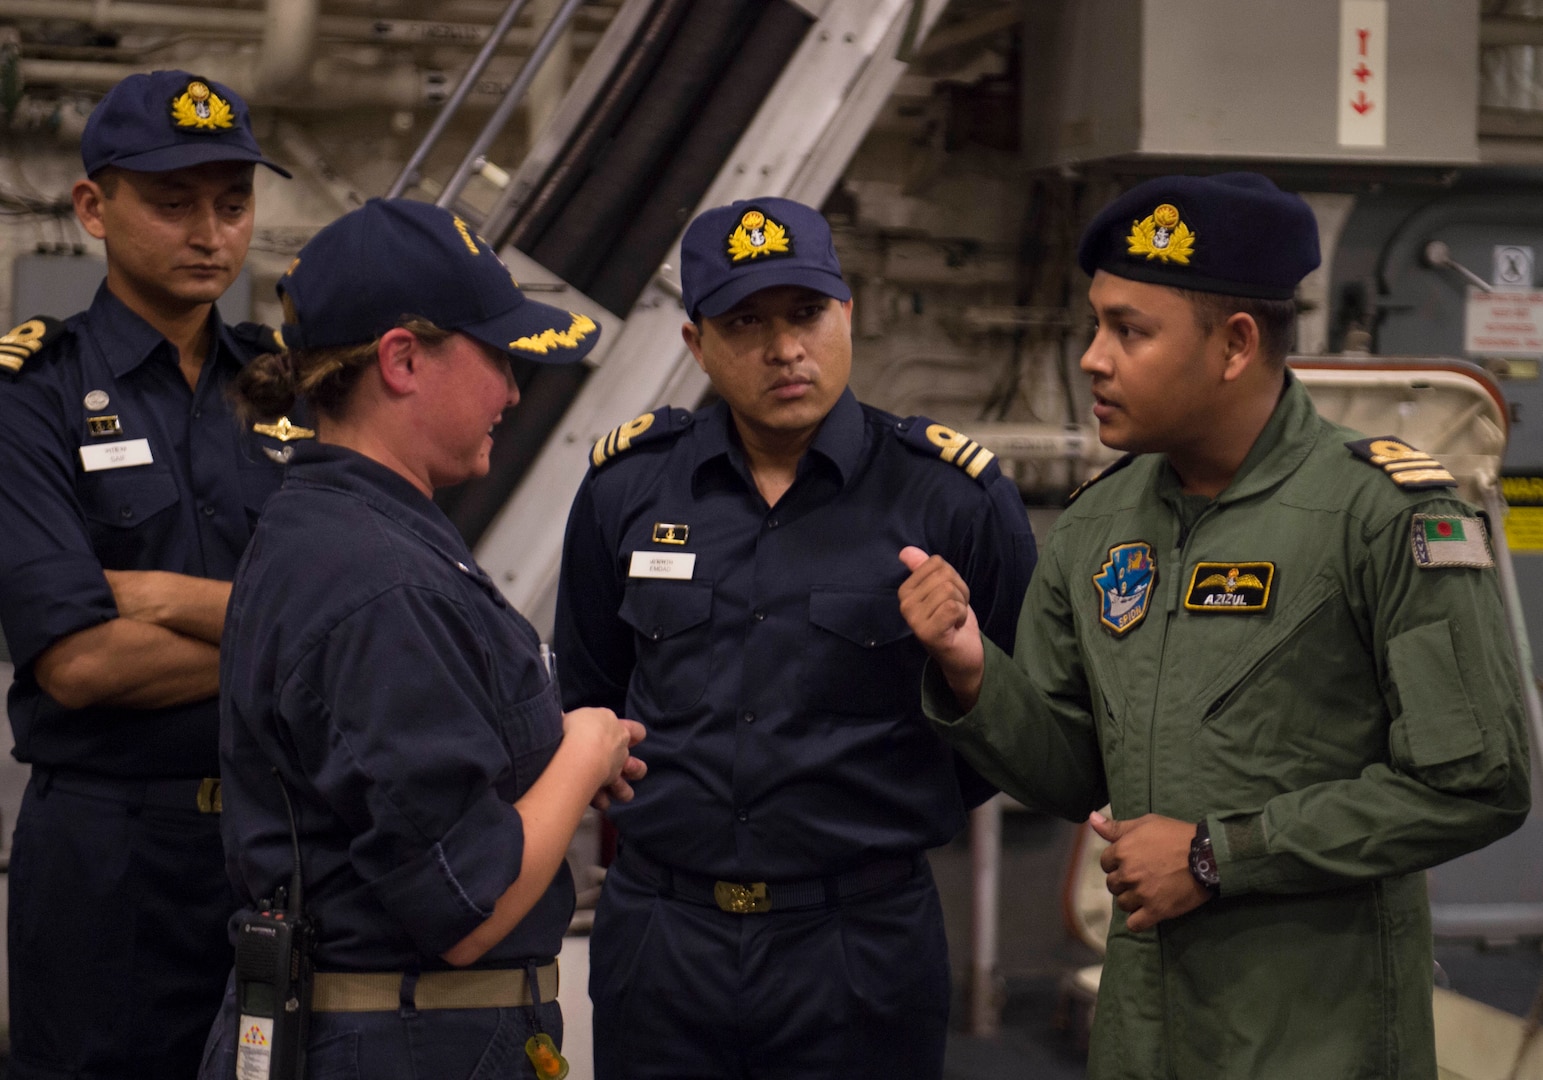 150930-N-MK881-404
BAY OF BENGAL (September 30, 2015) Cmdr. Michel Falzone, executive officer of the littoral combat ship USS Fort Worth (LCS 3), leads Bangladesh Navy Sailors on a tour of Fort Worth as part of Cooperation Afloat Readiness and Training (CARAT) Bangladesh 2015. CARAT is an annual, bilateral exercise series with the U.S. Navy, U.S. Marine Corps and the armed forces of nine partner nations. (U.S. Navy photo by Mass Communication Specialist 2nd Class Joe Bishop/Released)